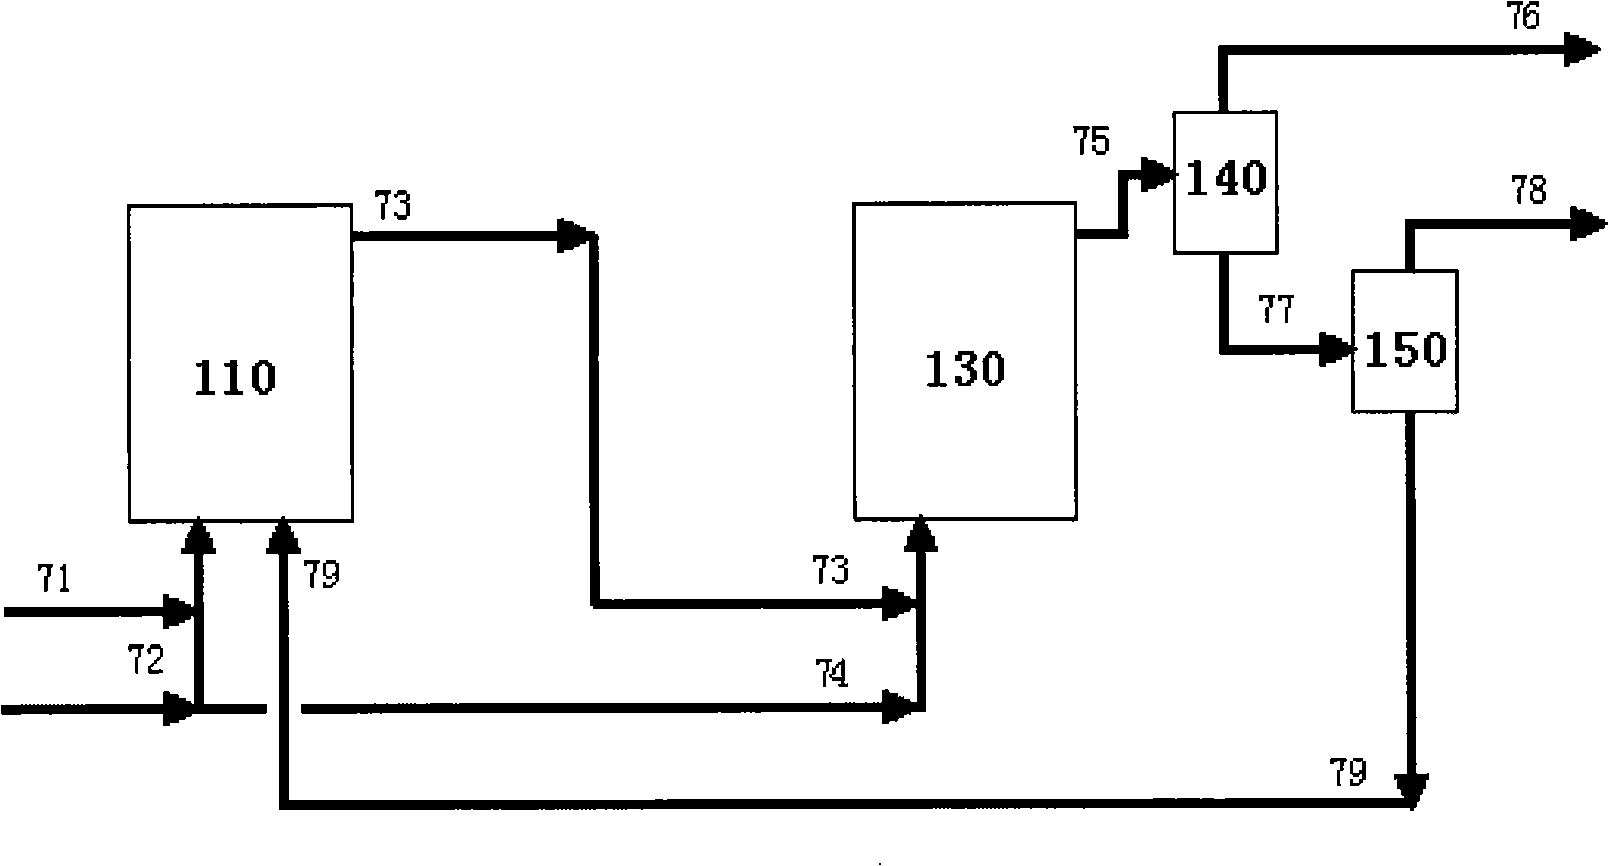 Two-stage reaction method for mixed butylene hydroformylation